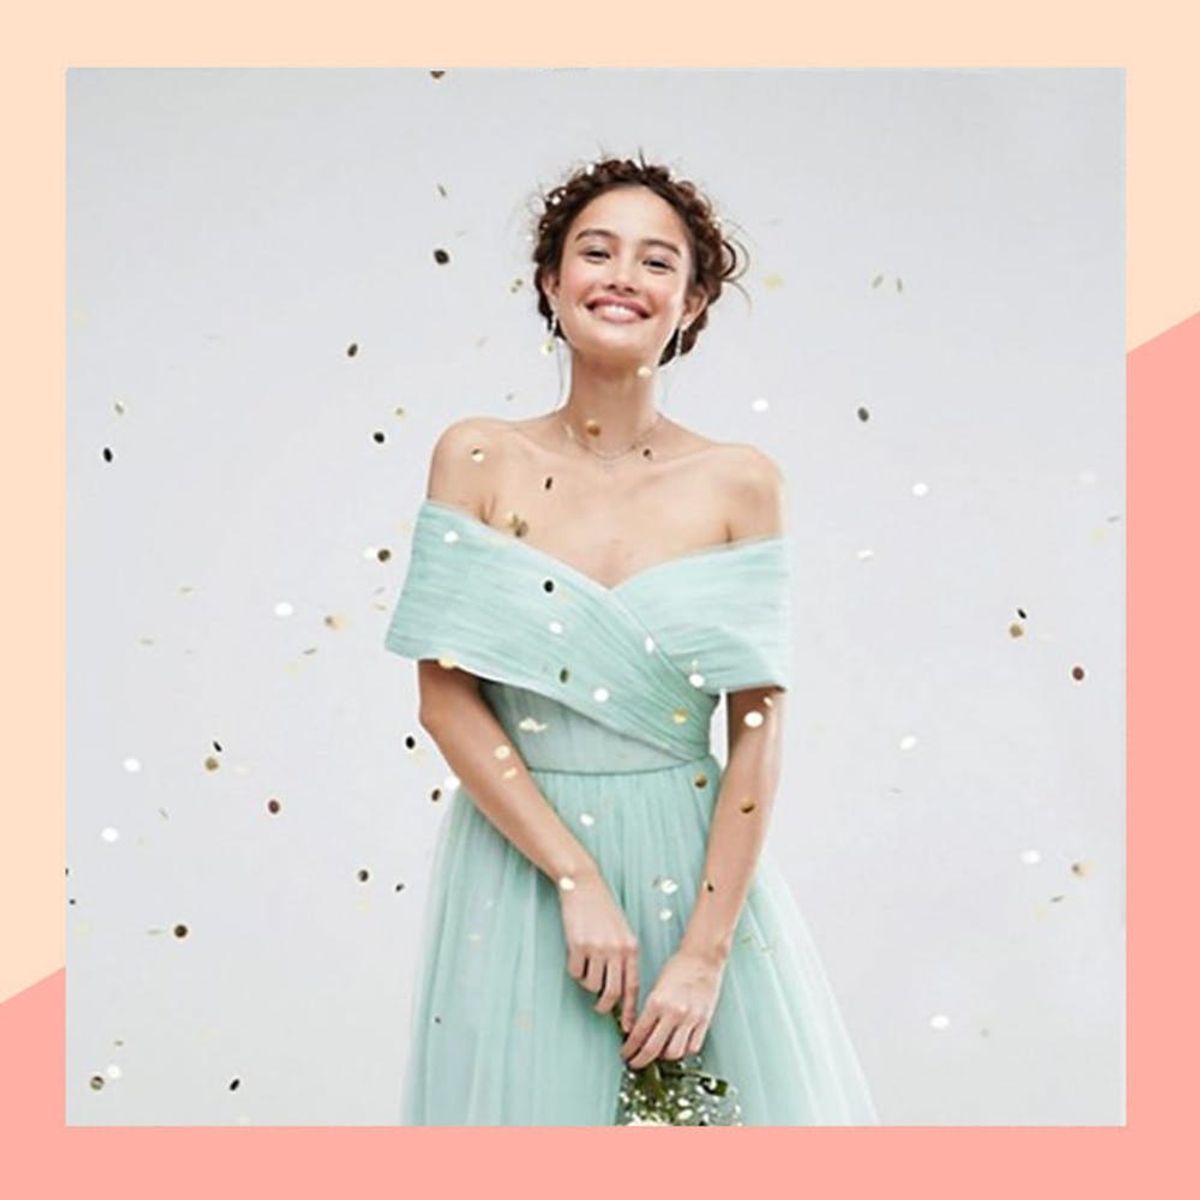 Where to Score a Sick Bridesmaid Dress for Your Wedding Party for Under $100